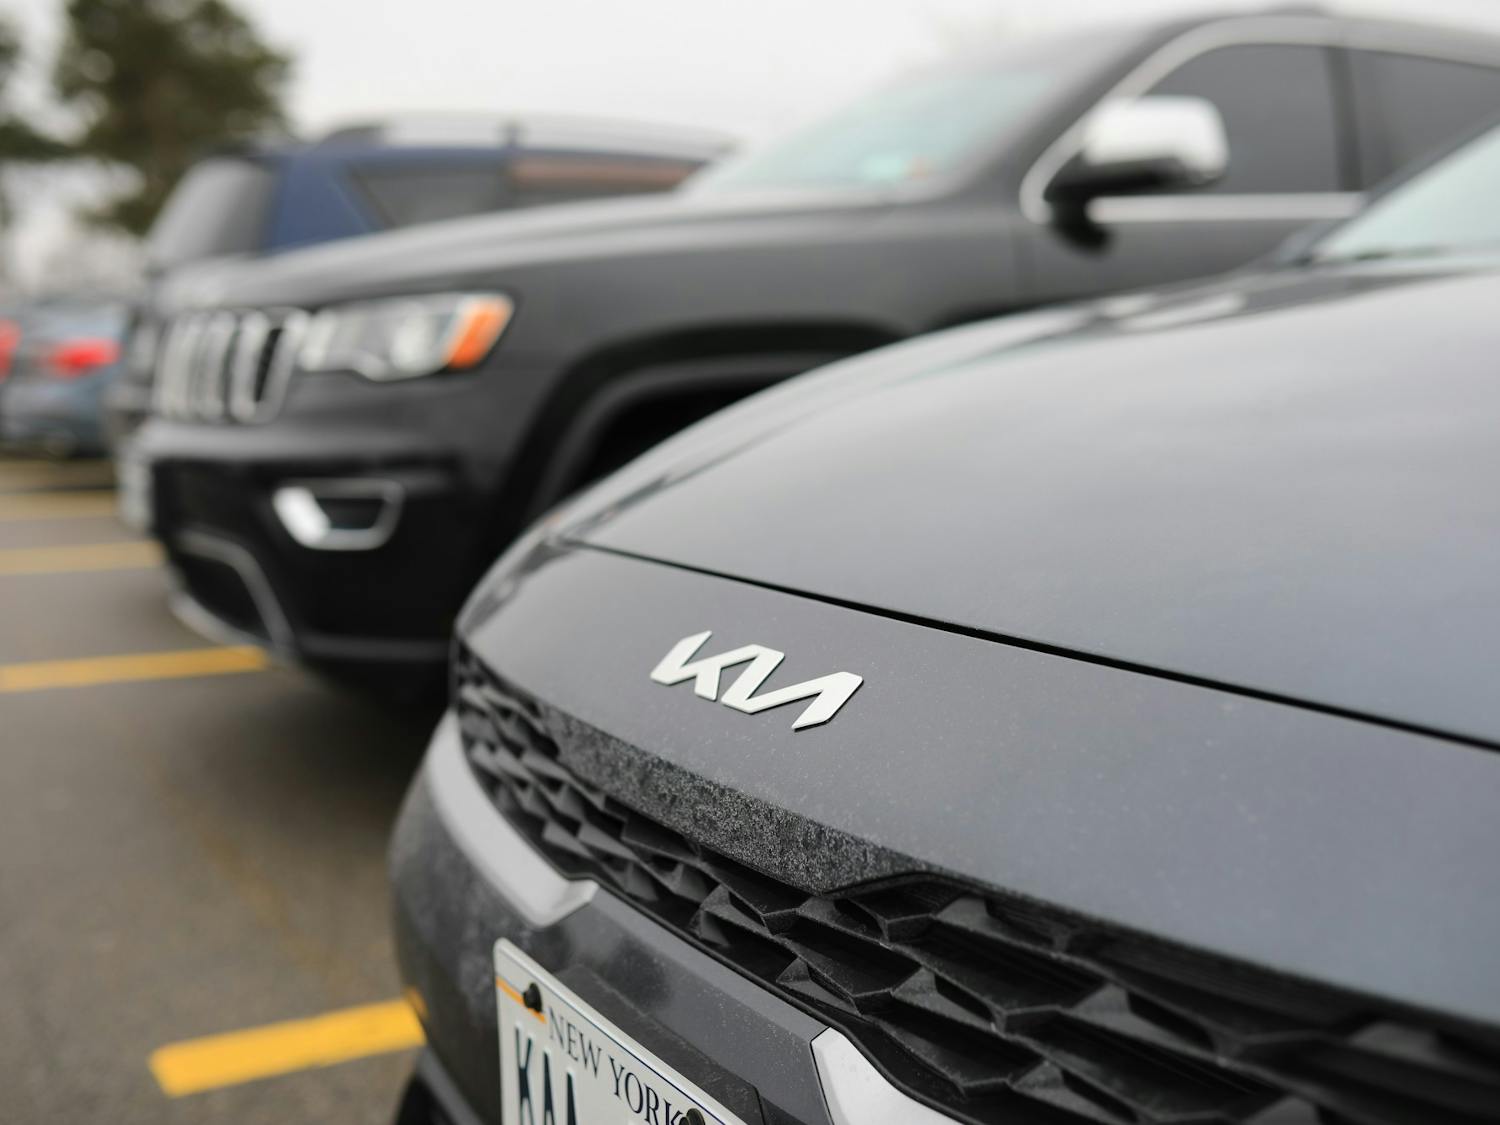 A recent Tik Tok trend has resulted in numerous Kia and Hyundai thefts in the Buffalo area.